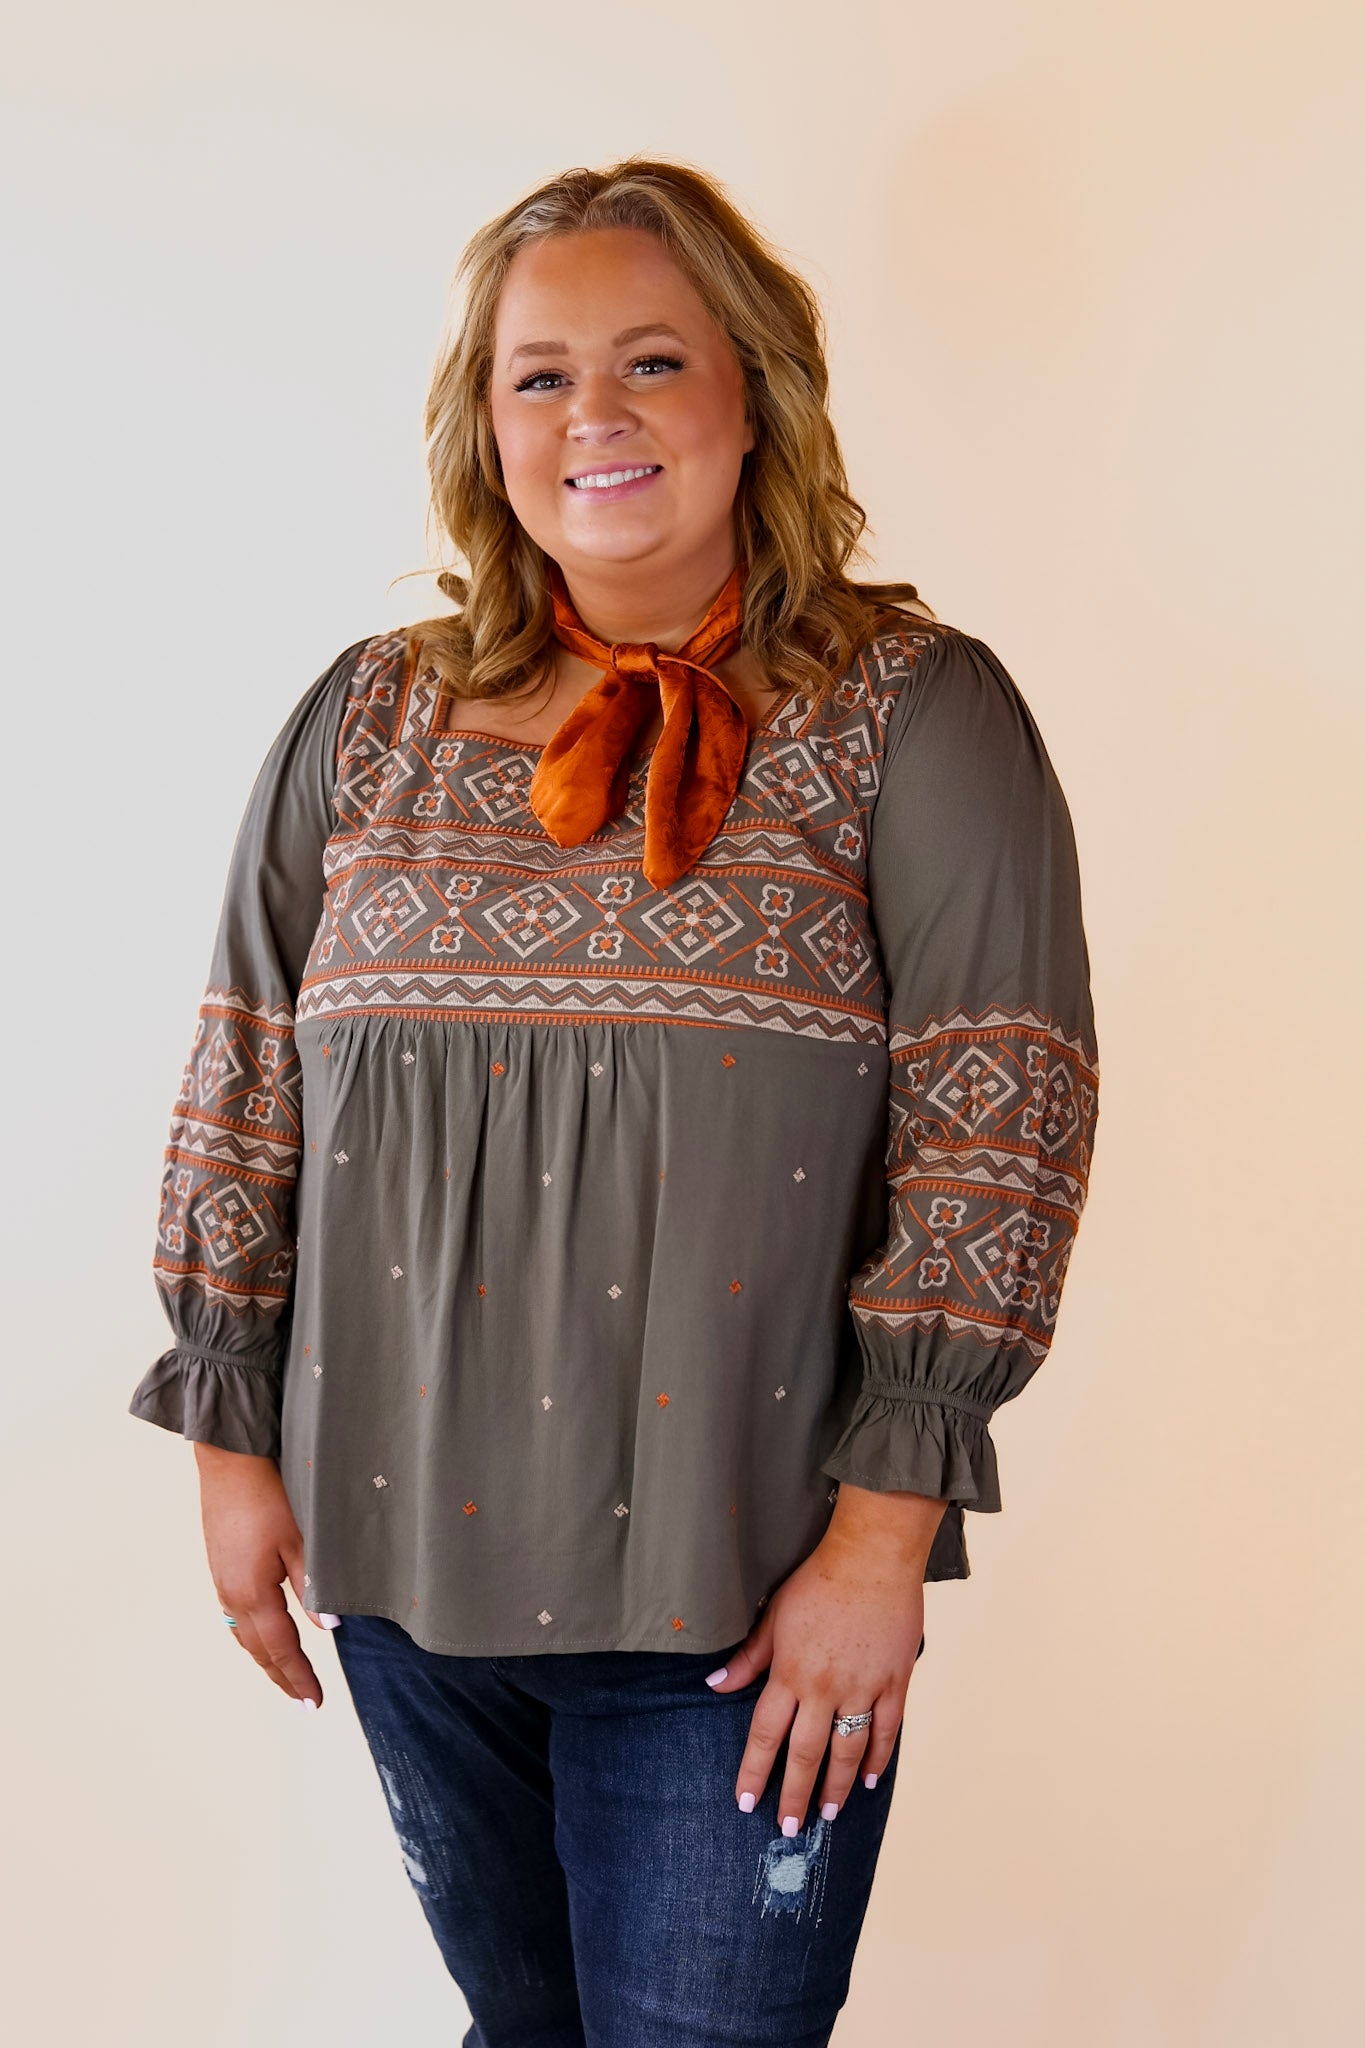 Address The Room Embroidered Square Neck Top with 3/4 Sleeves in Olive Green - Giddy Up Glamour Boutique